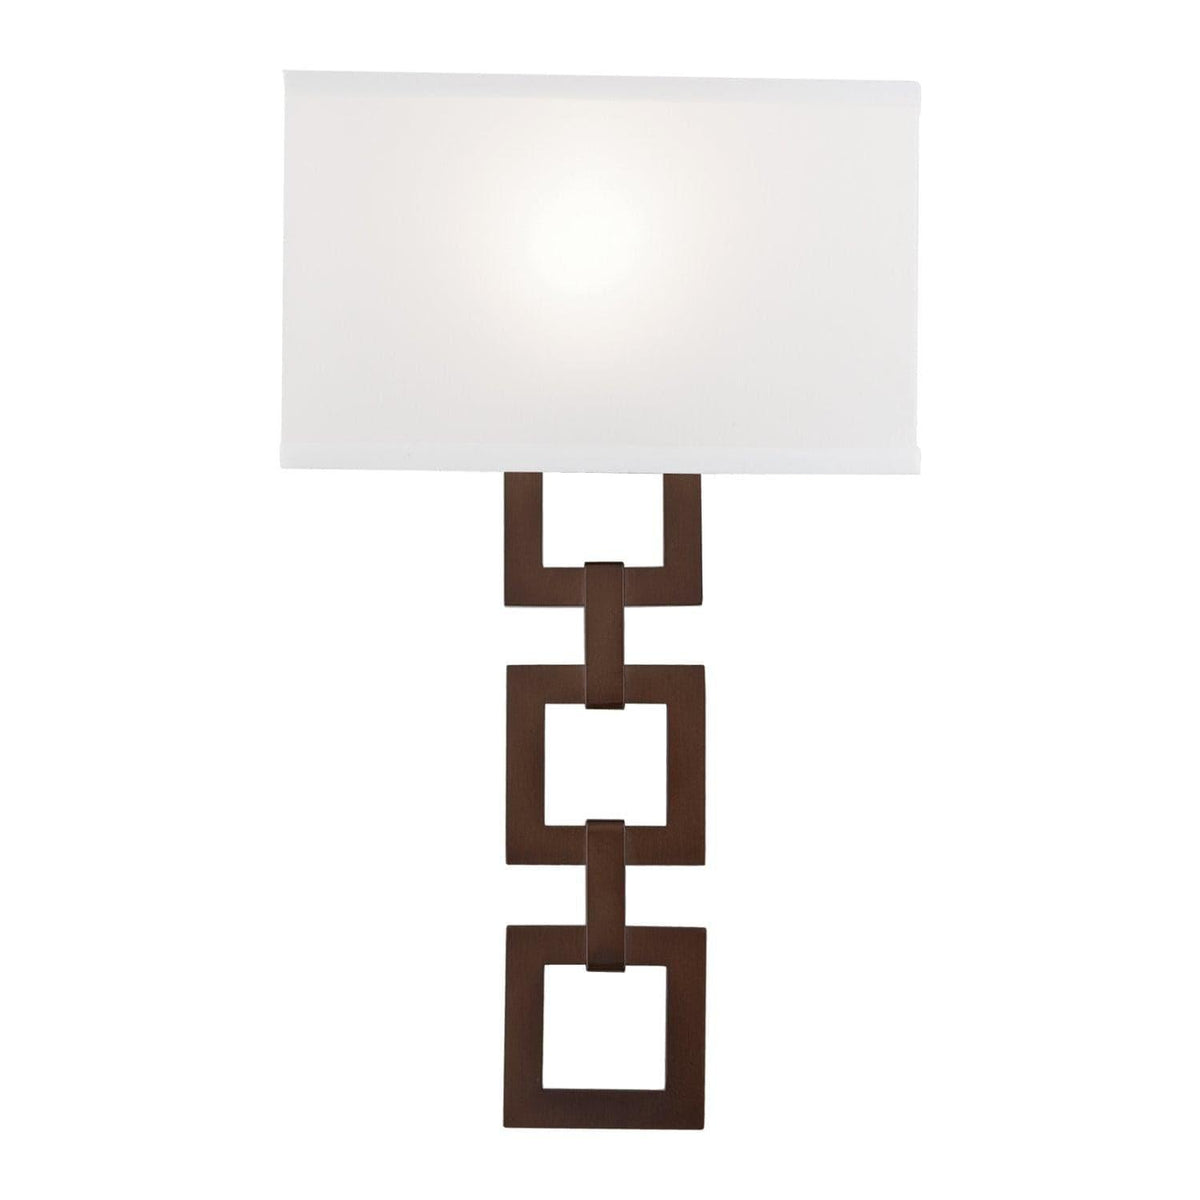 Hammerton Studio - Carlyle Square Link Cover Sconce - CSB0033-0B-RB-SH-E2 | Montreal Lighting & Hardware